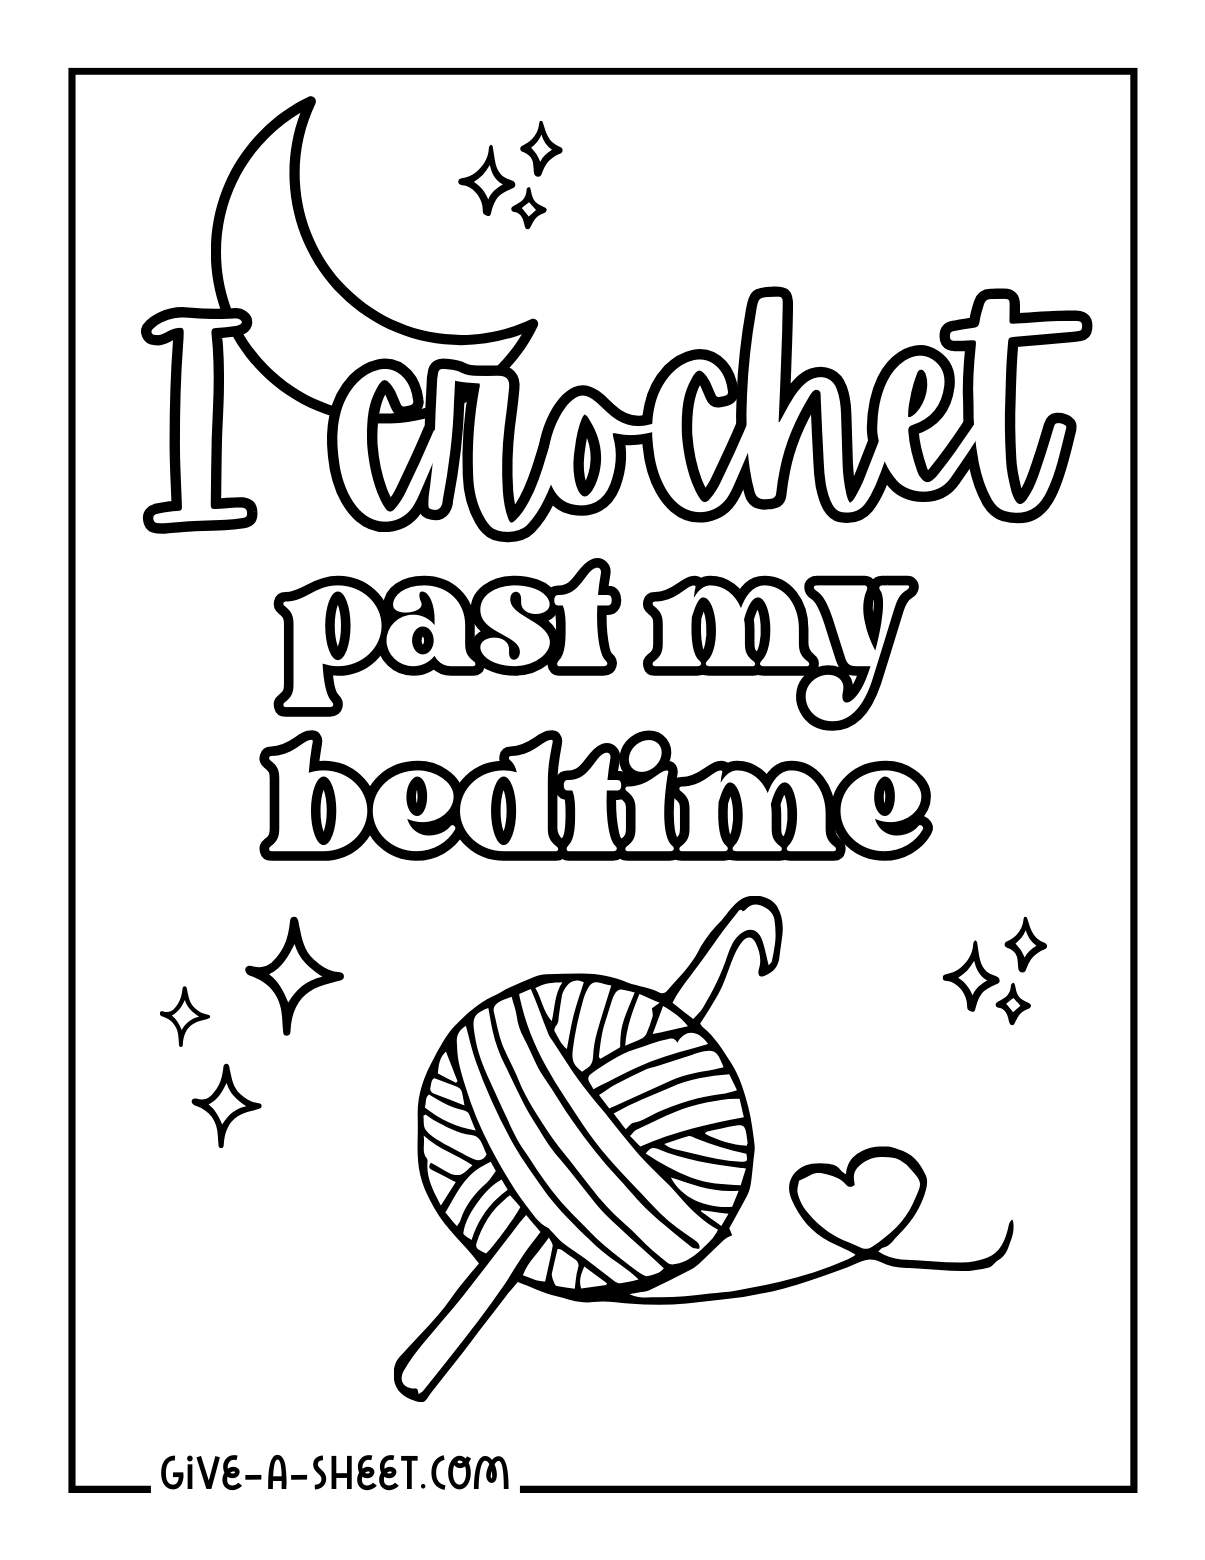 Crochet weaving coloring page.